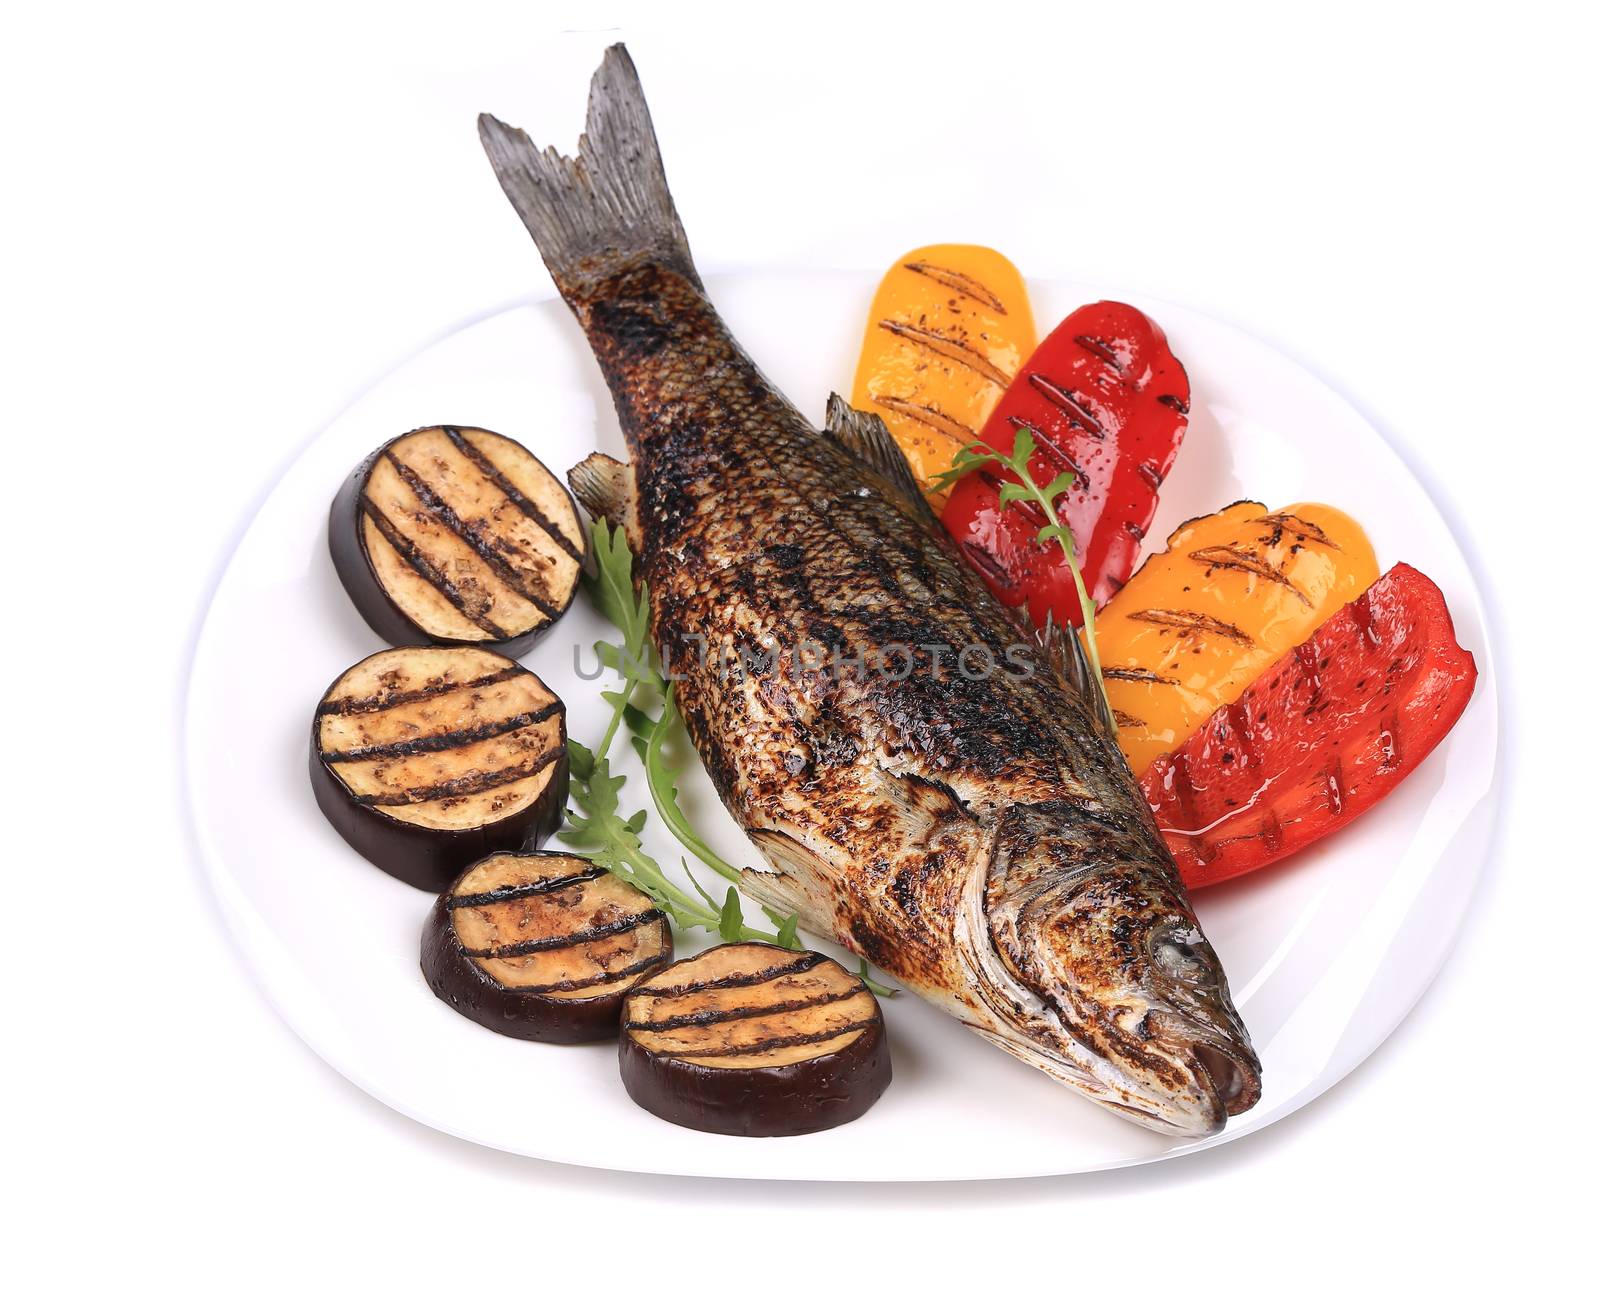 Grilled seabass fish with vegetables. Isolated on a white background.